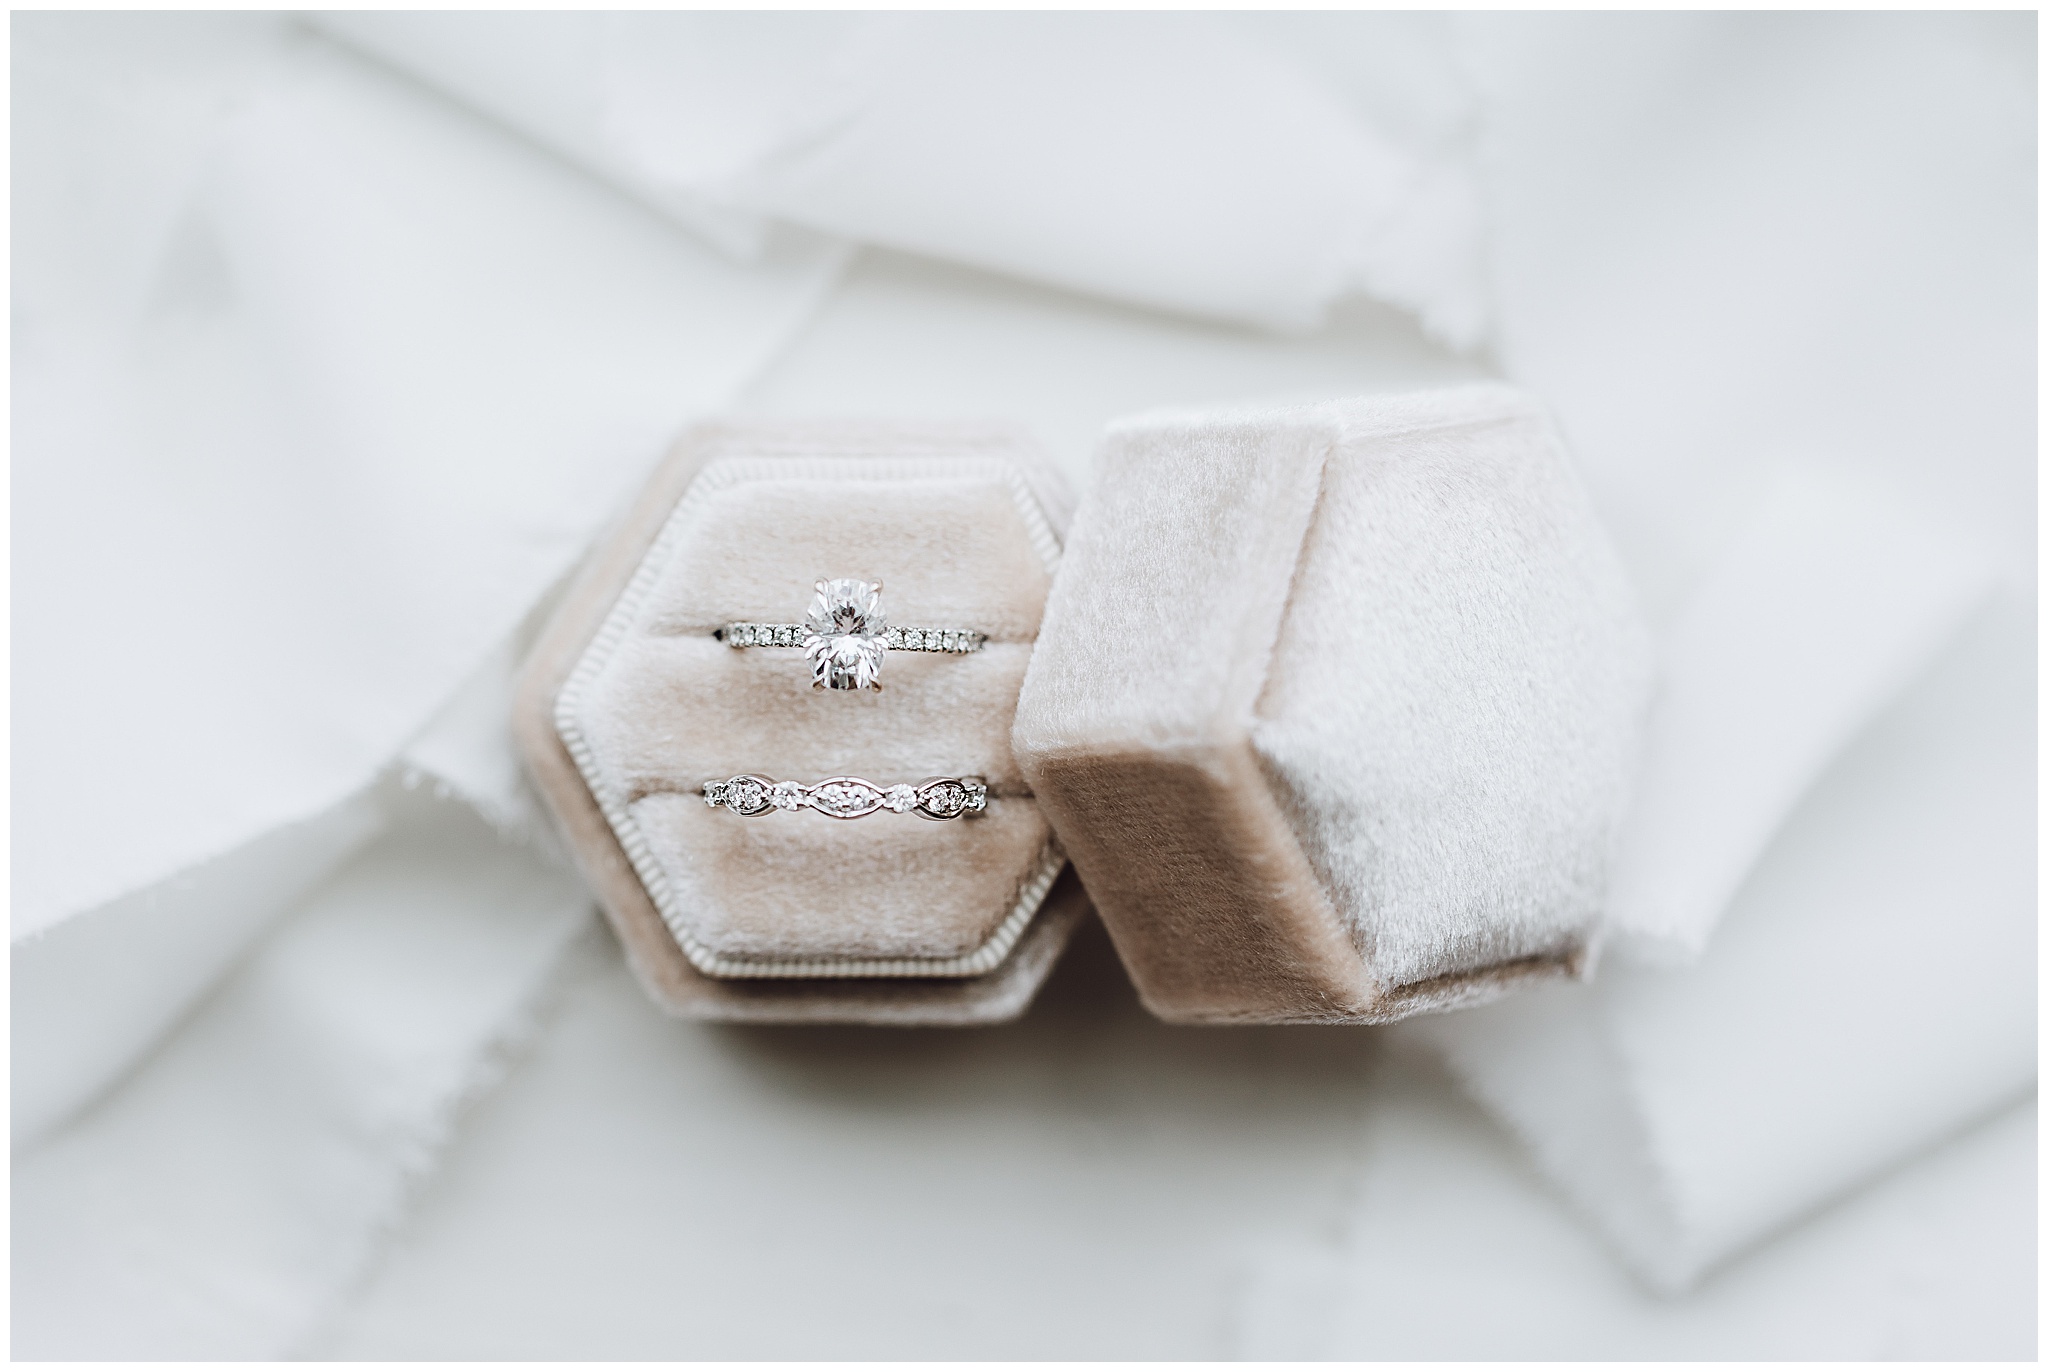 The bridal wedding rings sit in a tan ring box on a bed of white fabric